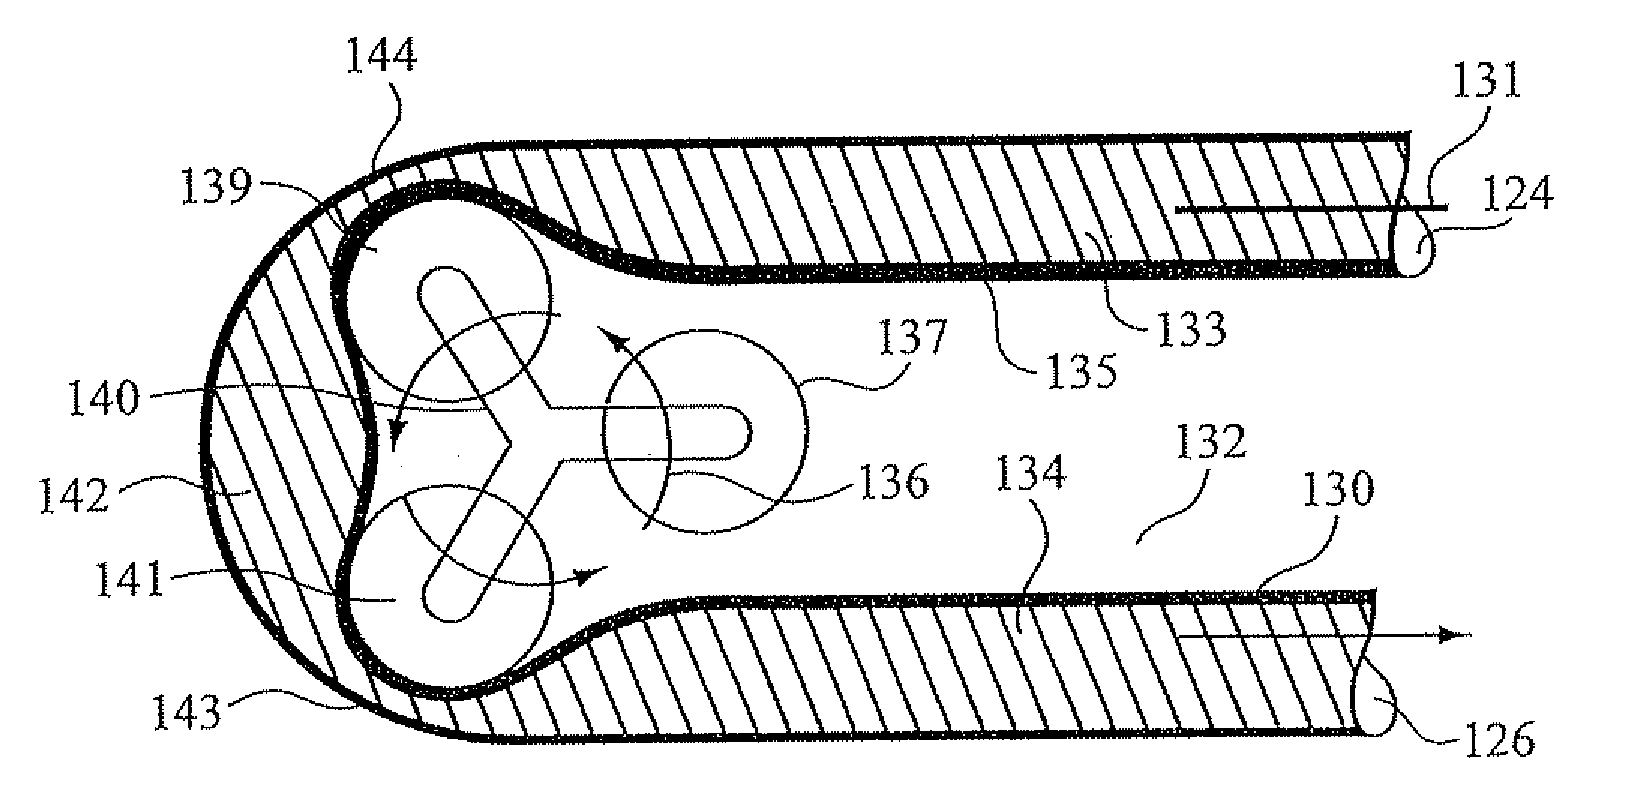 Method and device for improving blood flow by a series of electrically-induced muscular contractions